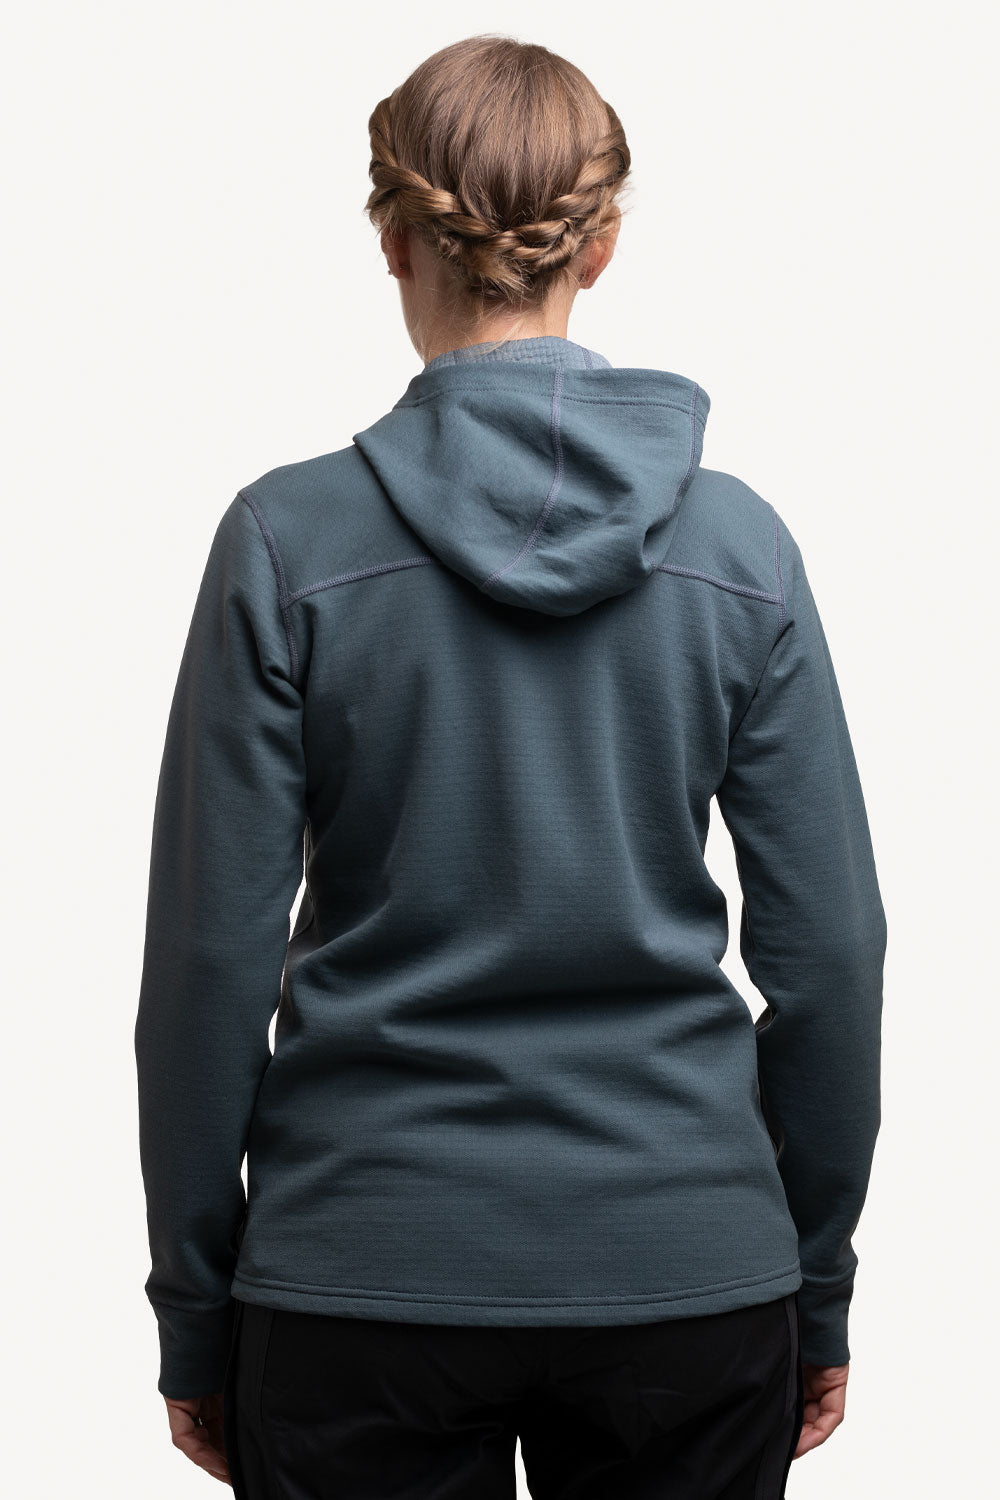 Women's all weather technical hoodie.